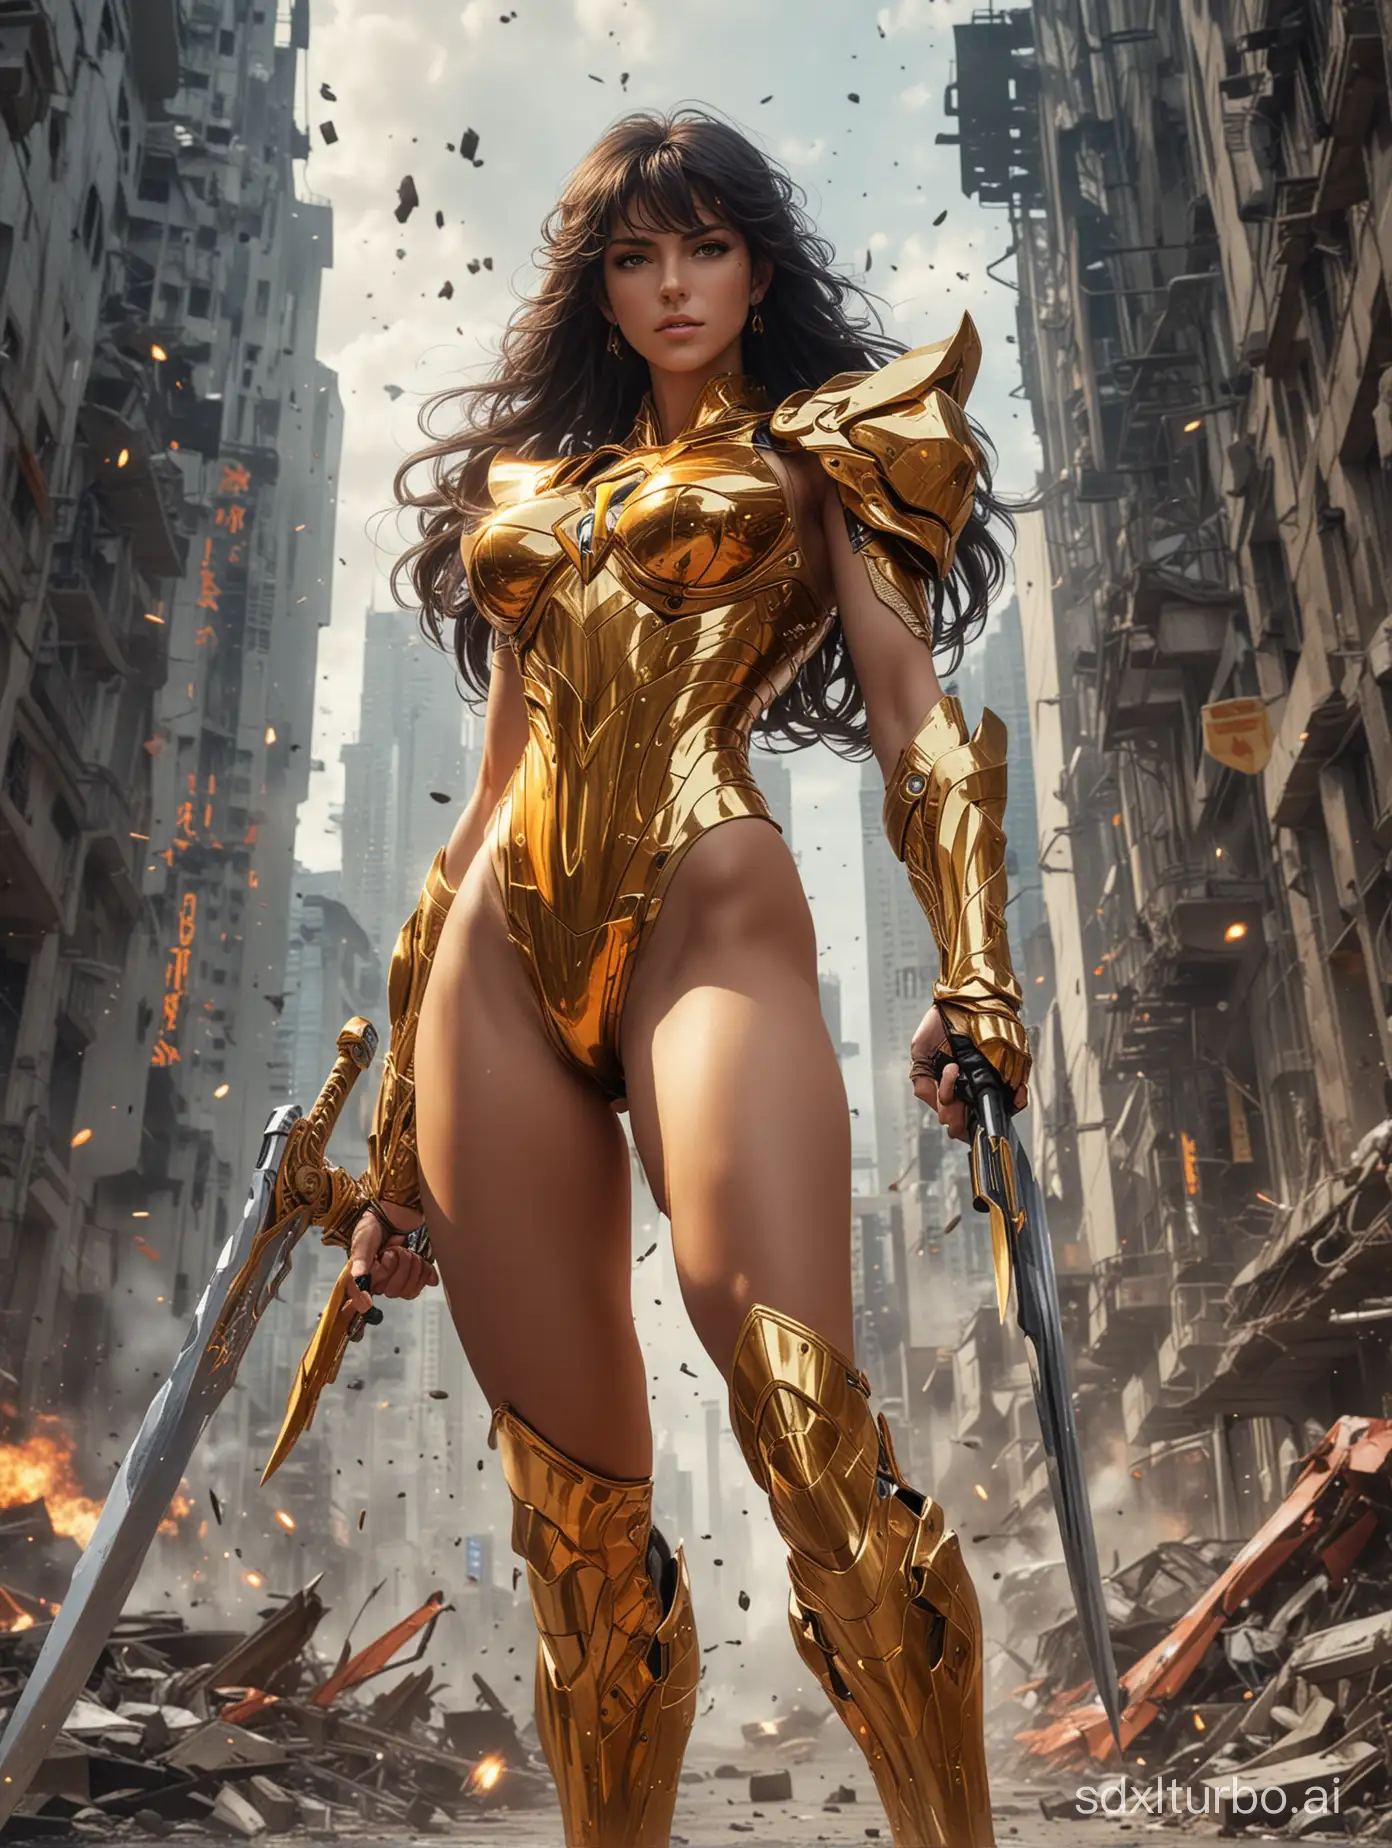 In the manga Saint Seiya, the style of the Golden Saints, Realistic style, view from below, futuristic beautiful woman with deadly golden bikini armor, futuristic weapons, holding a deadly big sword, explosions lighting up the night, orange Lamborghini aventator racing car, destroyed buildings, rubble, debris, high details, 16k, mythical warrior princess ，Long and slender thighs and calves, visible from head to foot